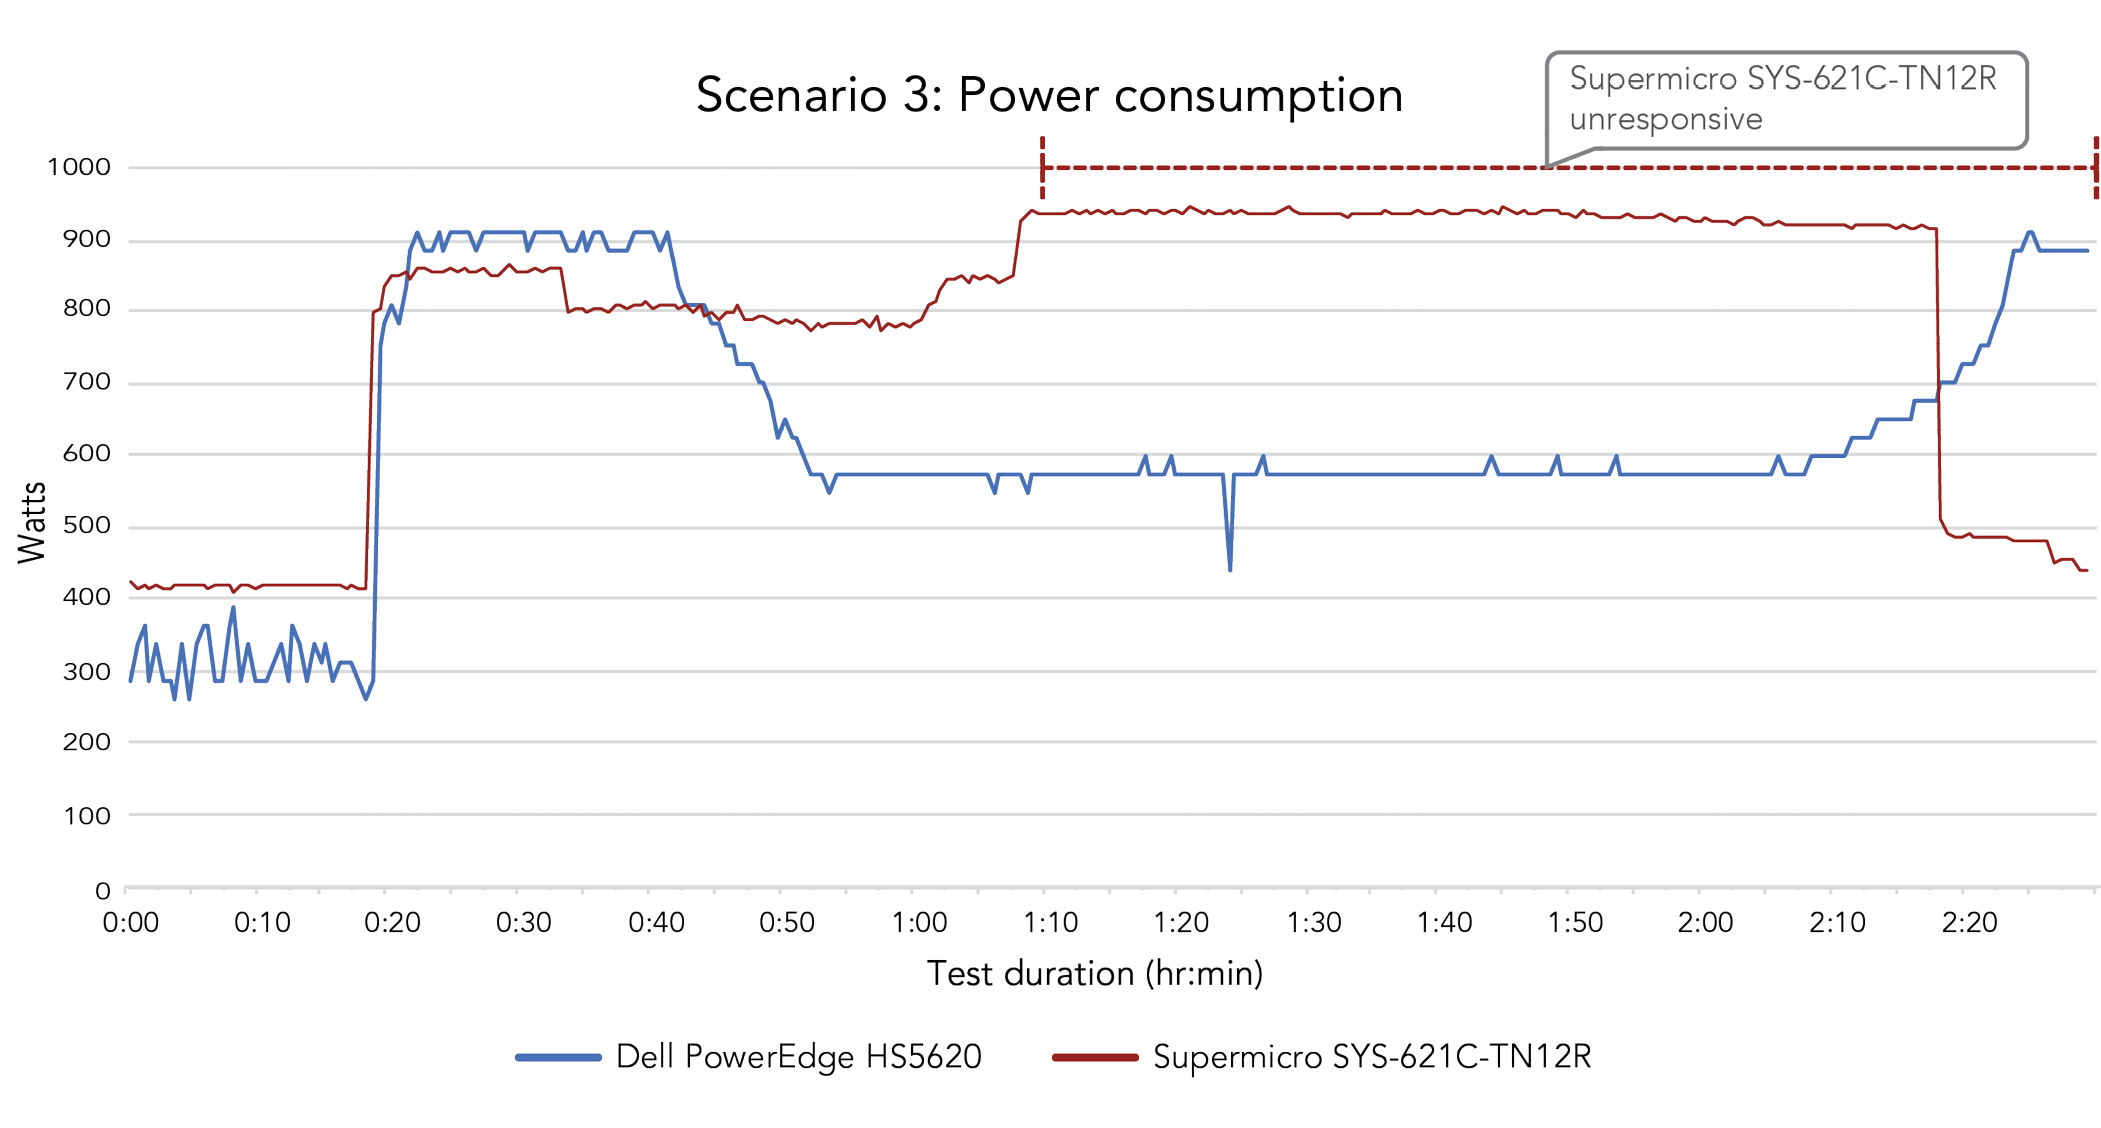 A line graph comparing each system’s power consumption over the course of the two-and-a-half-hour scenario 3 test, which includes an idle period 15 minutes before the workload began, the two-hour workload, and 15 minutes after the workload completed. The Dell PowerEdge HS5620 fluctuated between about 275 and 400 watts before the workload began, rose to just over 900 watts toward the start of the workload, then began dropping about 40 minutes into the test. Starting at about 55 minutes, it remained around 600 watts. When the workload ended, its power consumption rose again to around 900 watts. The Supermicro SYS‑621C-TN12R server’s power consumption remained steady at just over 400 watts before the workload began, then rose to around 850 watts at the start of the workload. Around 35 minutes into the test, its consumption dropped to 800 watts and just below, but rose to around 925 watts when the system became unresponsive around 1 hour and 10 minutes into the test. It continued to consume around 925 watts throughout the workload, even as it was unresponsive. When the workload ended, the system’s power consumption dropped to 500 watts, and then to around 425 watts.